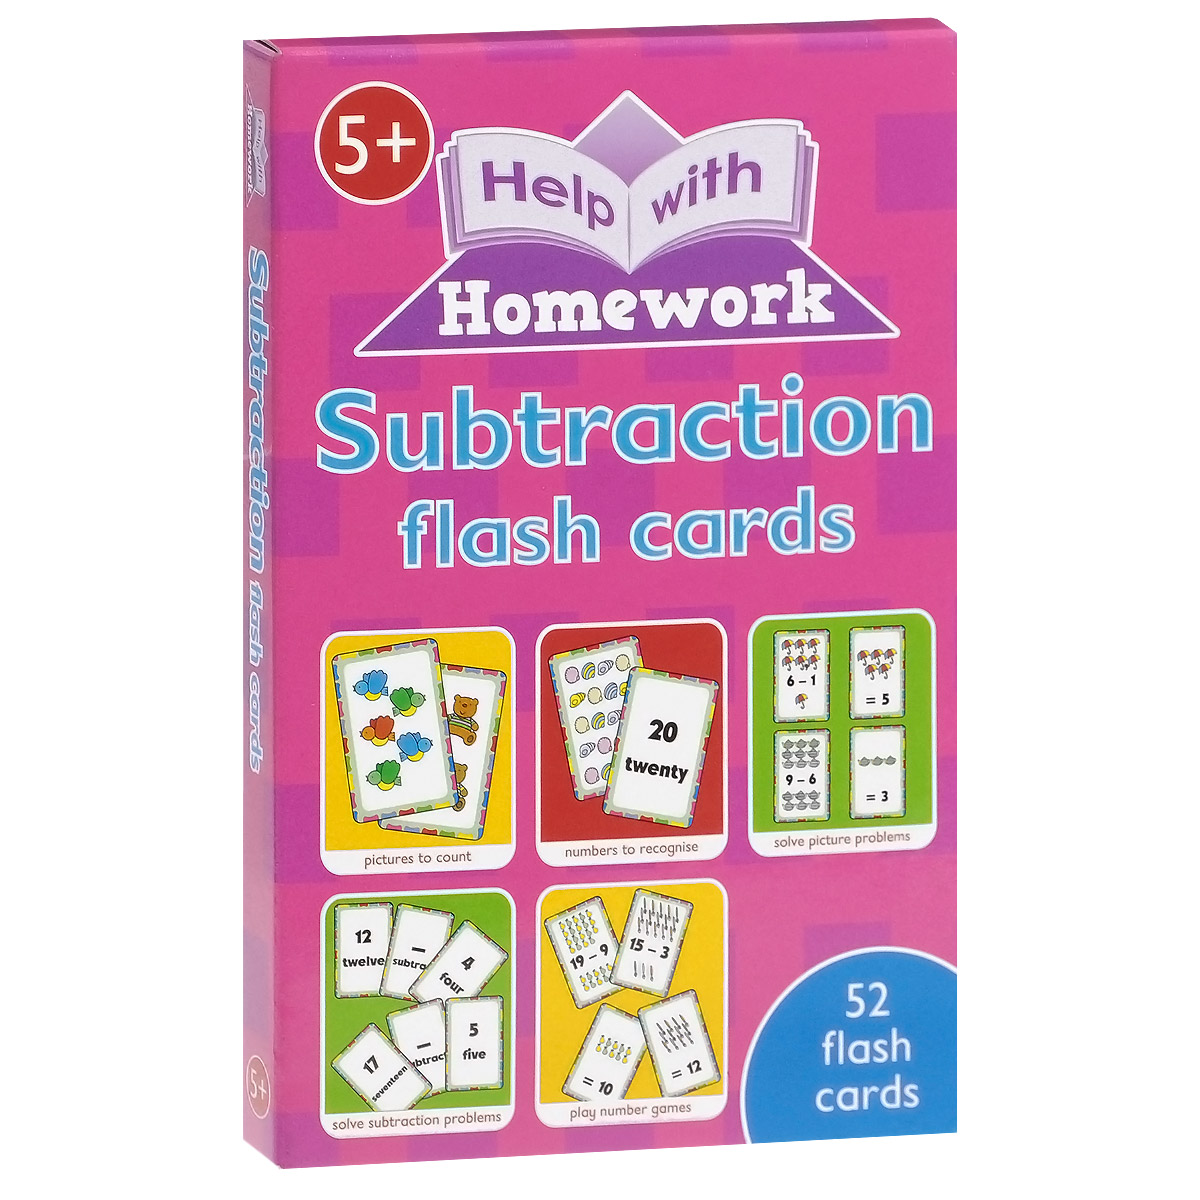 Subtraction (52 flash cards)